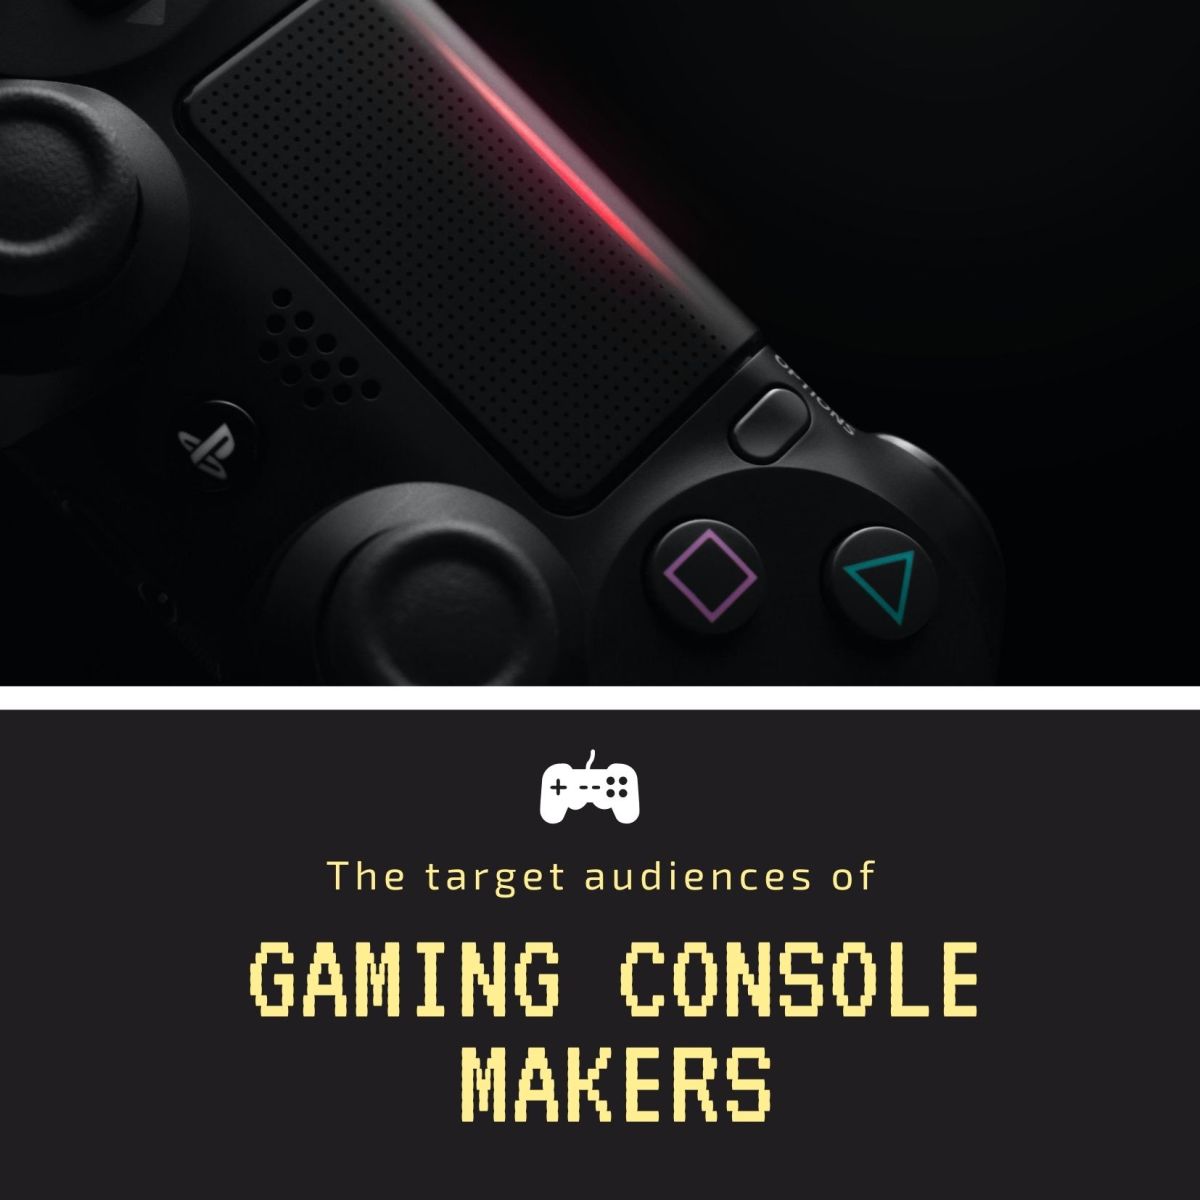 Gaming Console Audience Targets